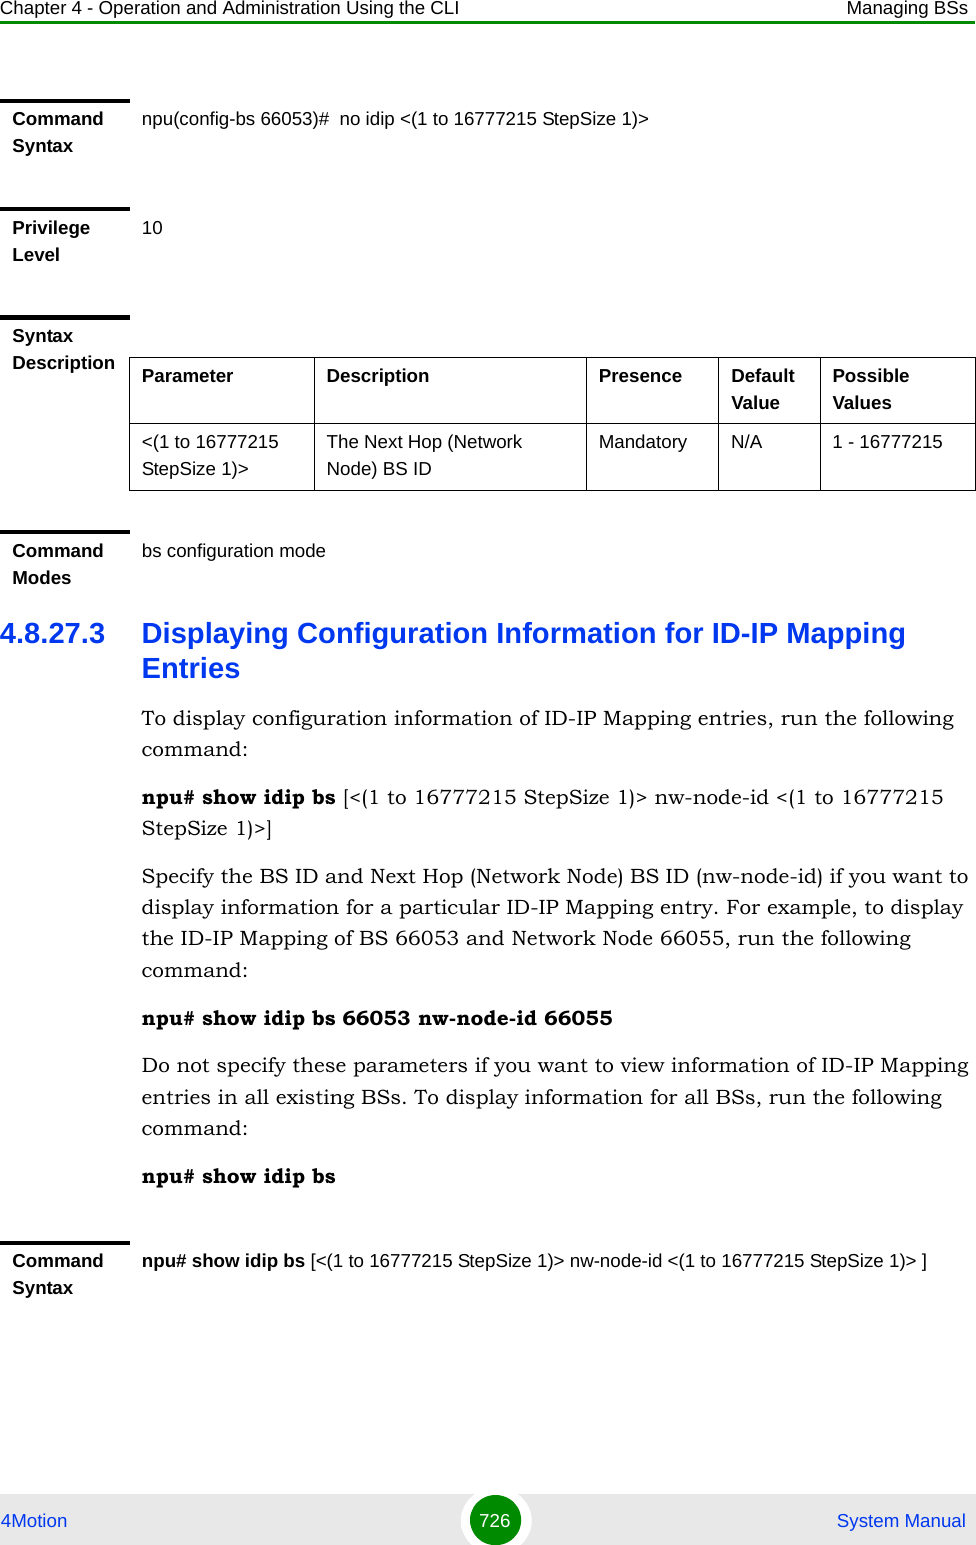 Chapter 4 - Operation and Administration Using the CLI Managing BSs4Motion 726  System Manual4.8.27.3 Displaying Configuration Information for ID-IP Mapping EntriesTo display configuration information of ID-IP Mapping entries, run the following command:npu# show idip bs [&lt;(1 to 16777215 StepSize 1)&gt; nw-node-id &lt;(1 to 16777215 StepSize 1)&gt;]Specify the BS ID and Next Hop (Network Node) BS ID (nw-node-id) if you want to display information for a particular ID-IP Mapping entry. For example, to display the ID-IP Mapping of BS 66053 and Network Node 66055, run the following command:npu# show idip bs 66053 nw-node-id 66055Do not specify these parameters if you want to view information of ID-IP Mapping entries in all existing BSs. To display information for all BSs, run the following command:npu# show idip bsCommand Syntaxnpu(config-bs 66053)#  no idip &lt;(1 to 16777215 StepSize 1)&gt; Privilege Level10Syntax Description Parameter Description Presence Default ValuePossible Values&lt;(1 to 16777215 StepSize 1)&gt;The Next Hop (Network Node) BS IDMandatory N/A 1 - 16777215Command Modesbs configuration modeCommand Syntaxnpu# show idip bs [&lt;(1 to 16777215 StepSize 1)&gt; nw-node-id &lt;(1 to 16777215 StepSize 1)&gt; ]